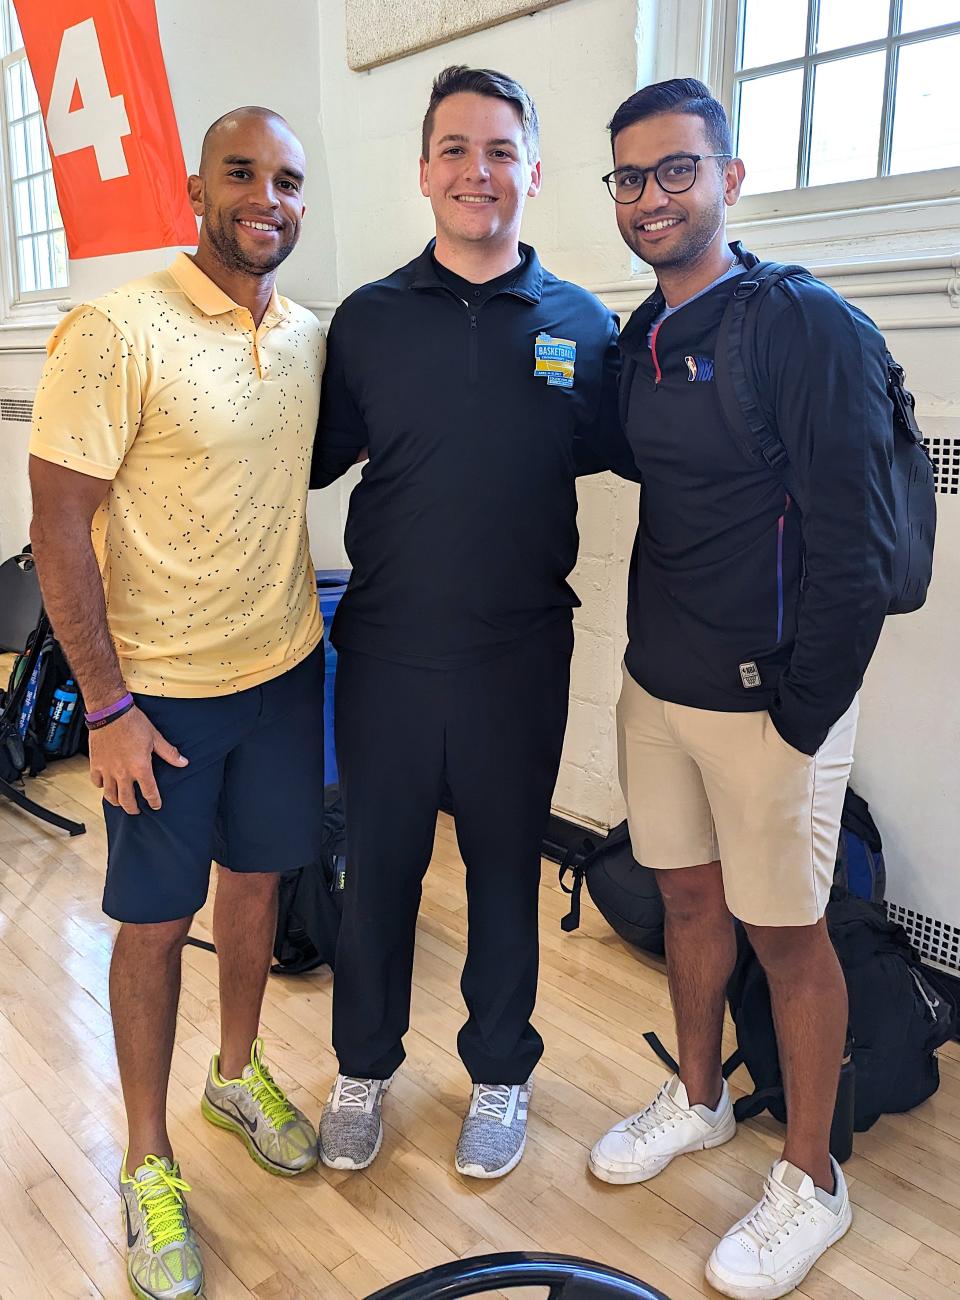 A.J. Jones (center) met NBA officials Matt Myers (left) and Suyash Mehta while working the NIRSA National Championship tournament at the University of Maryland April14-16.